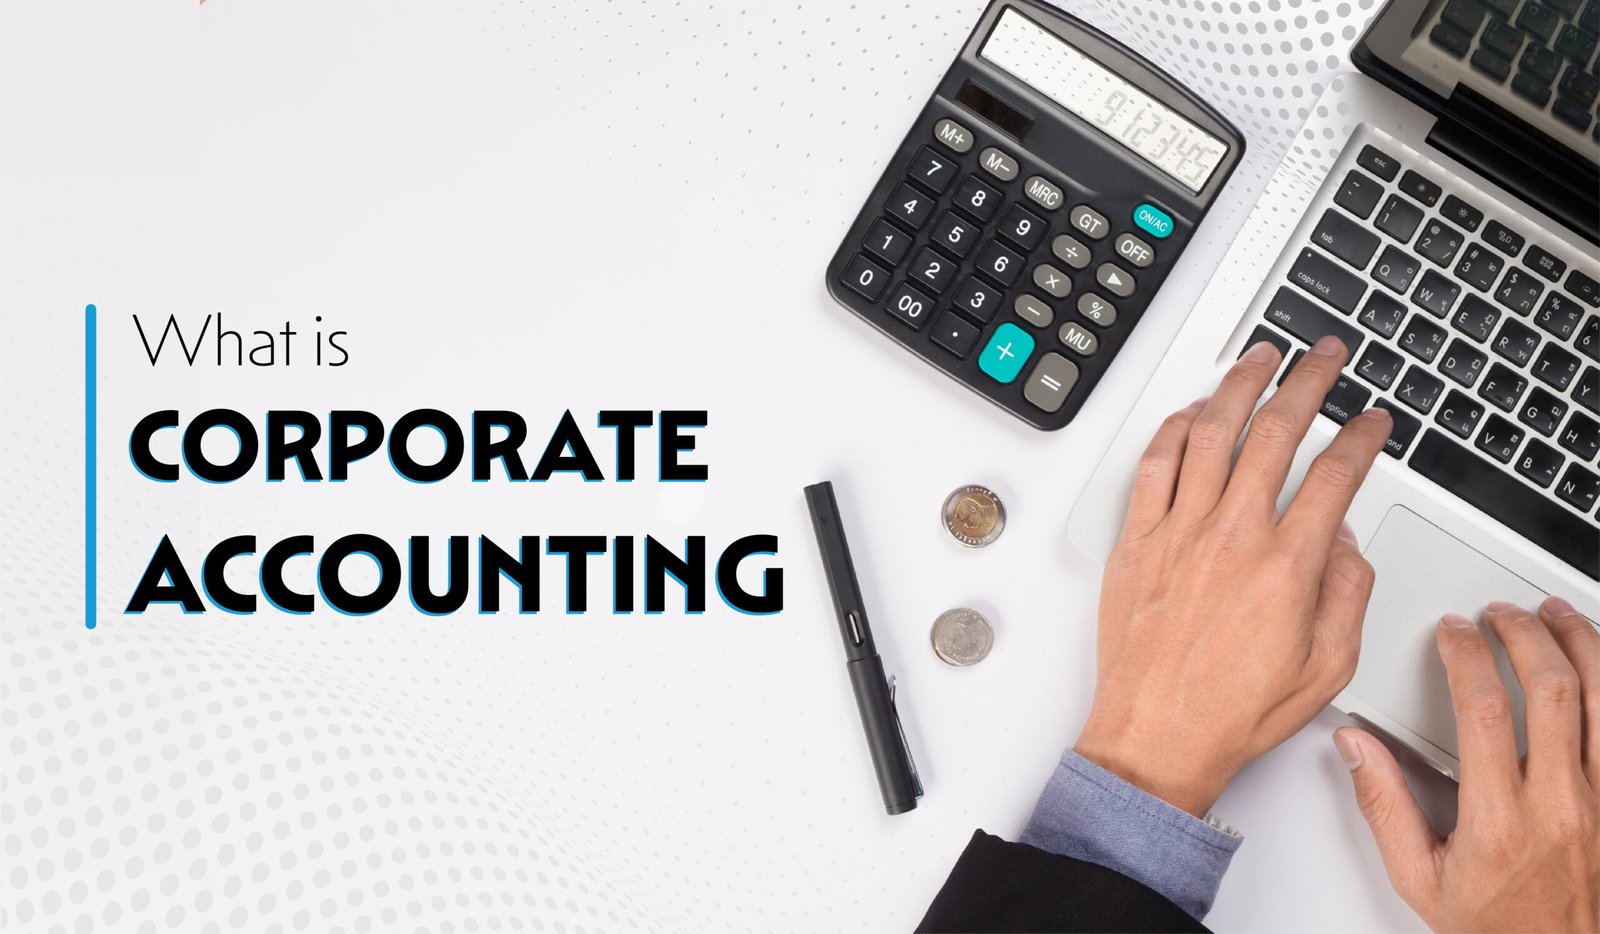 What is Corporate Accounting